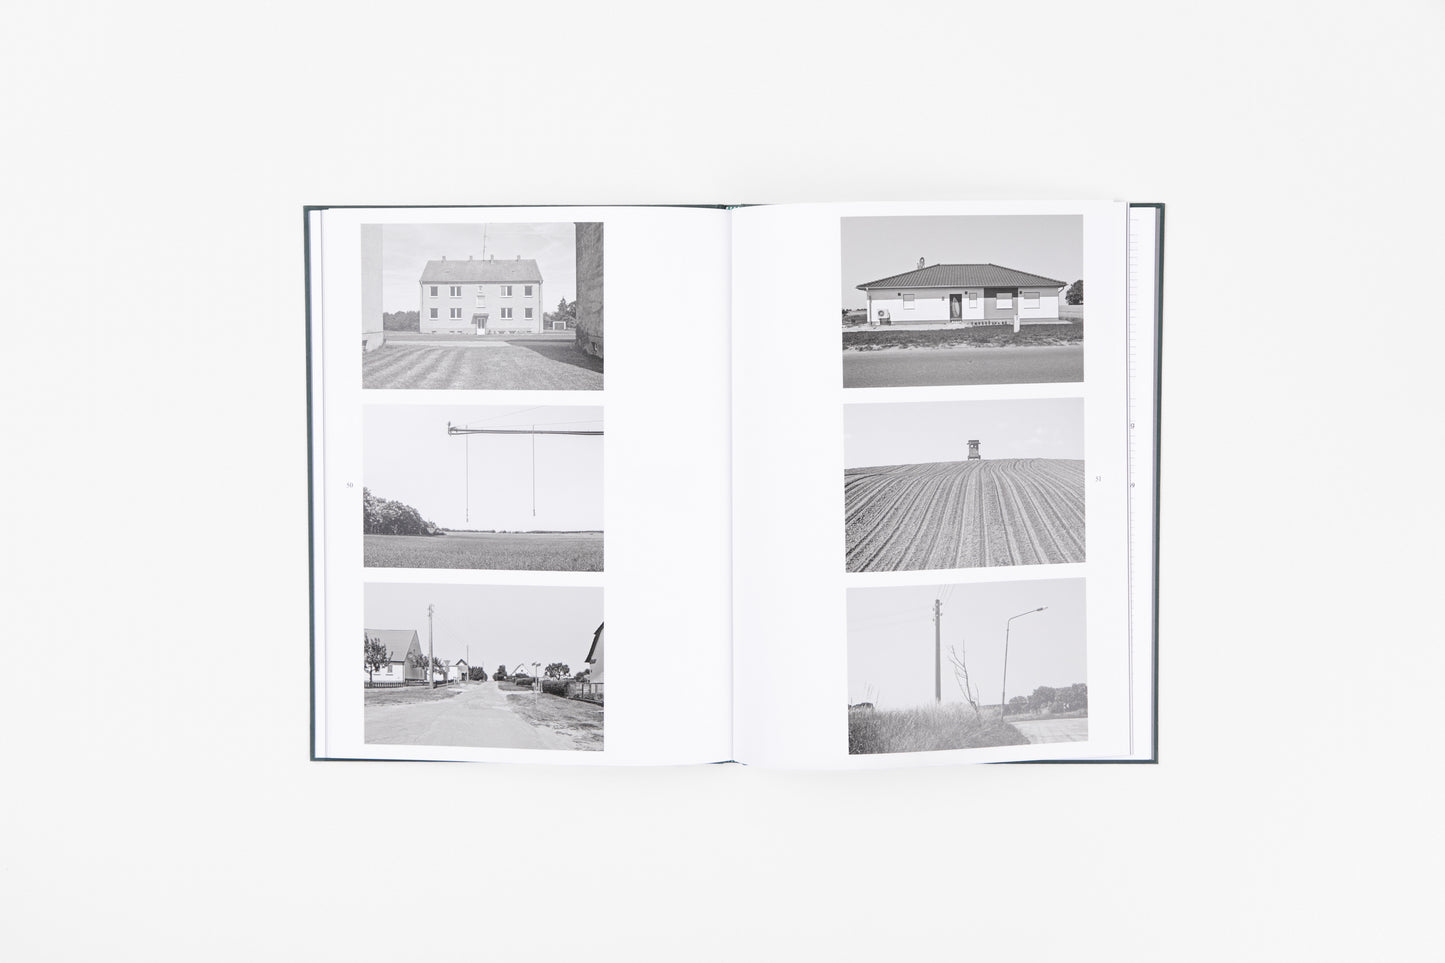 Wanderings About History: The Photography of Ulrich Wüst